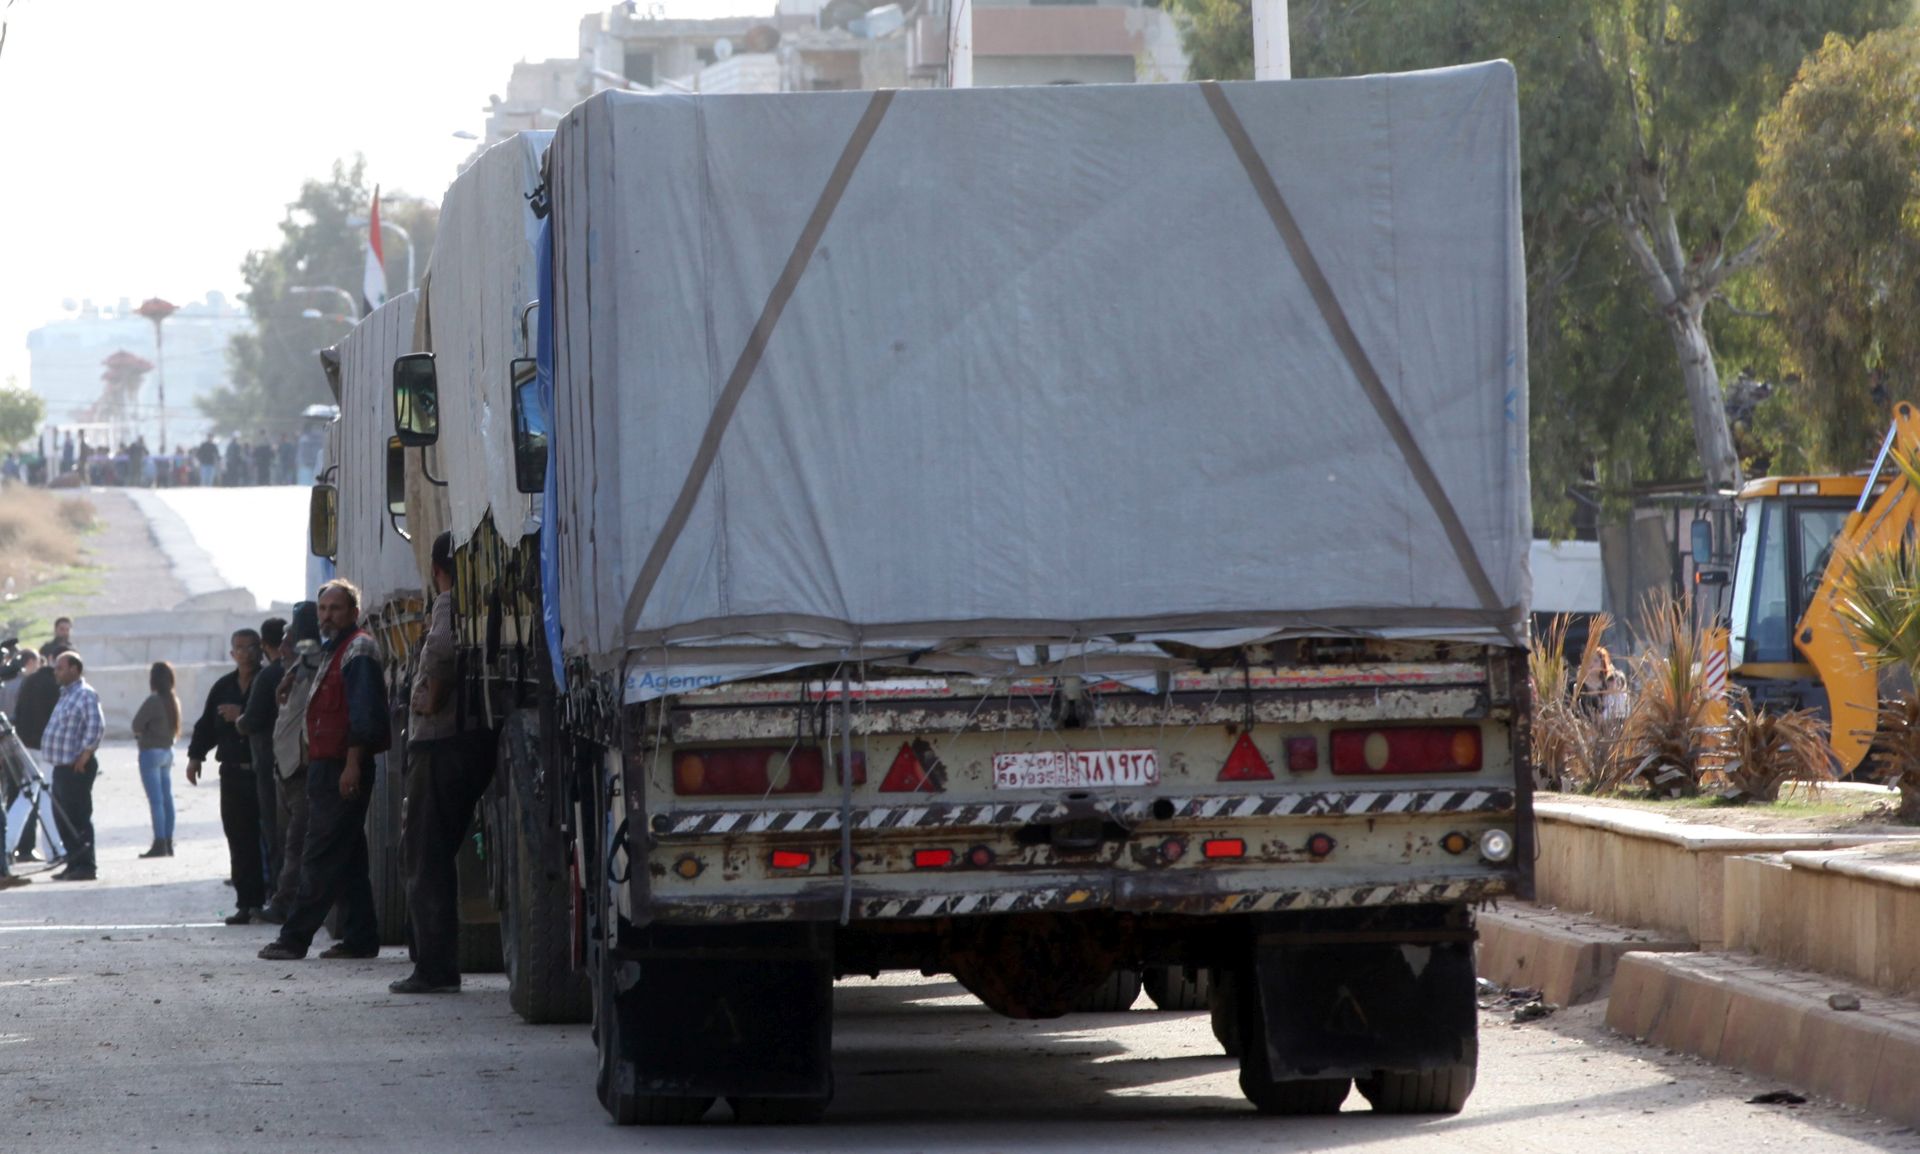 epa05166729 Trucks with relief goods head to al-Moaddamiyeh town in the countryside of Damascus, Syria, 17 February 2016. Around 73 trucks loaded with food, infant formula and medicines, in addition to a mobile clinic and a medical team, will head to the besieged rebel-held towns of Madaya, al-Zabadani and al-Moadhamiya, as part of a UN sponsored aid operation in the war-torn country. A similar convoy of 25 trucks, a mobile clinic and a medical team, headed to the villages of Foua and Kfraya in the northern Idlib, which are besieged by rebels. The convoys are the third humanitarian aid delivery to the besieged areas after two similar efforts last month.  EPA/YOUSSEF BADAWI